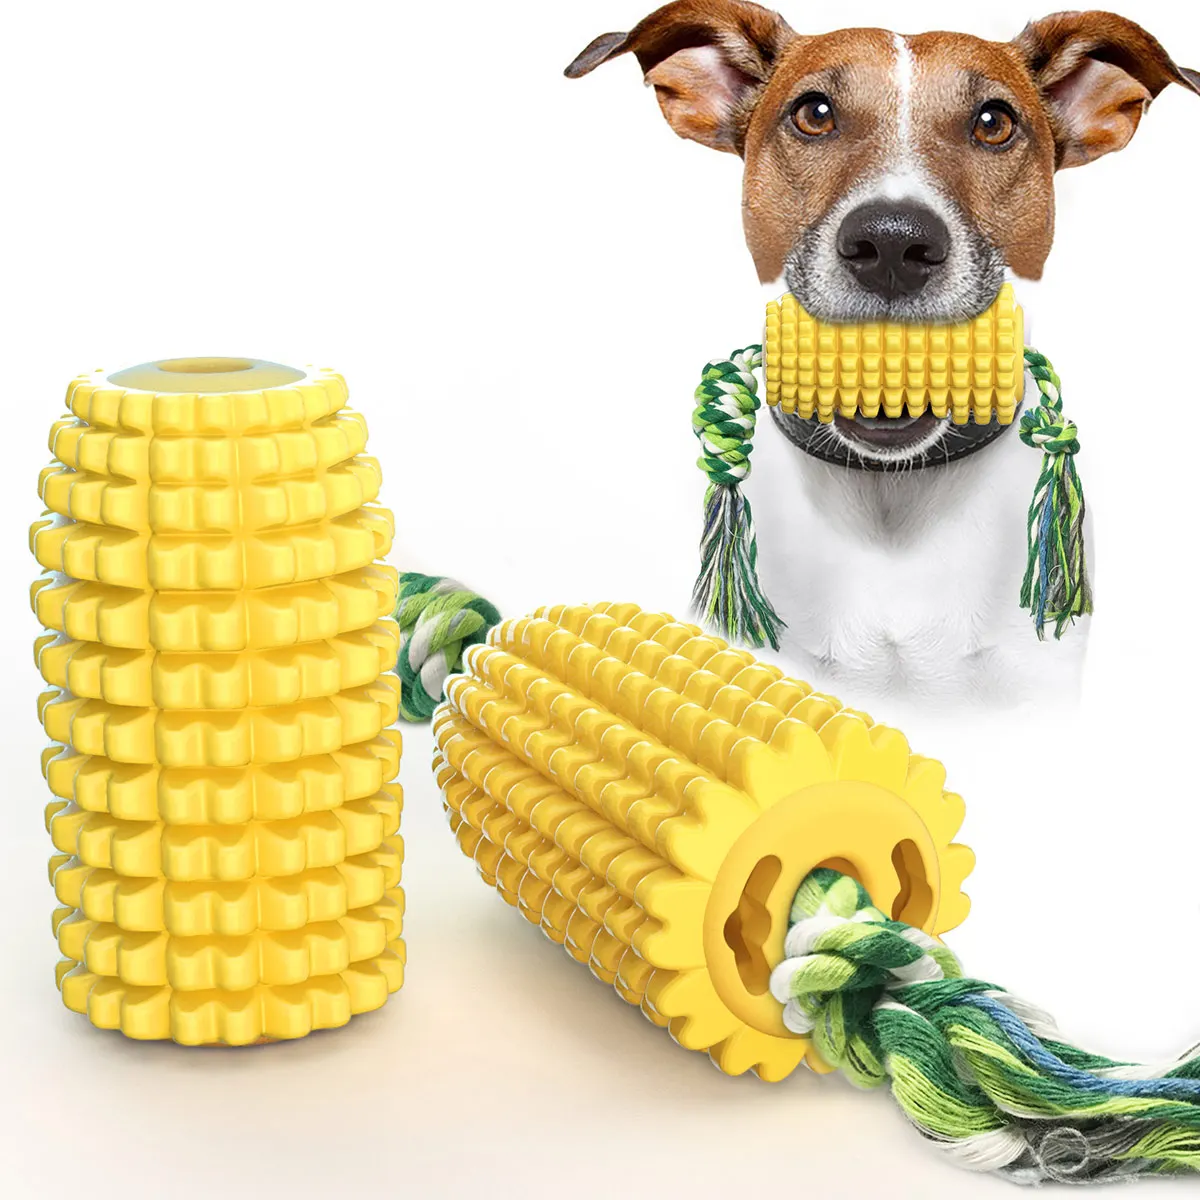 

2020 Amazon hot sale dog toy corn molar grinding stick bite-resistant toothbrush dog chew toy with rope, Yellow